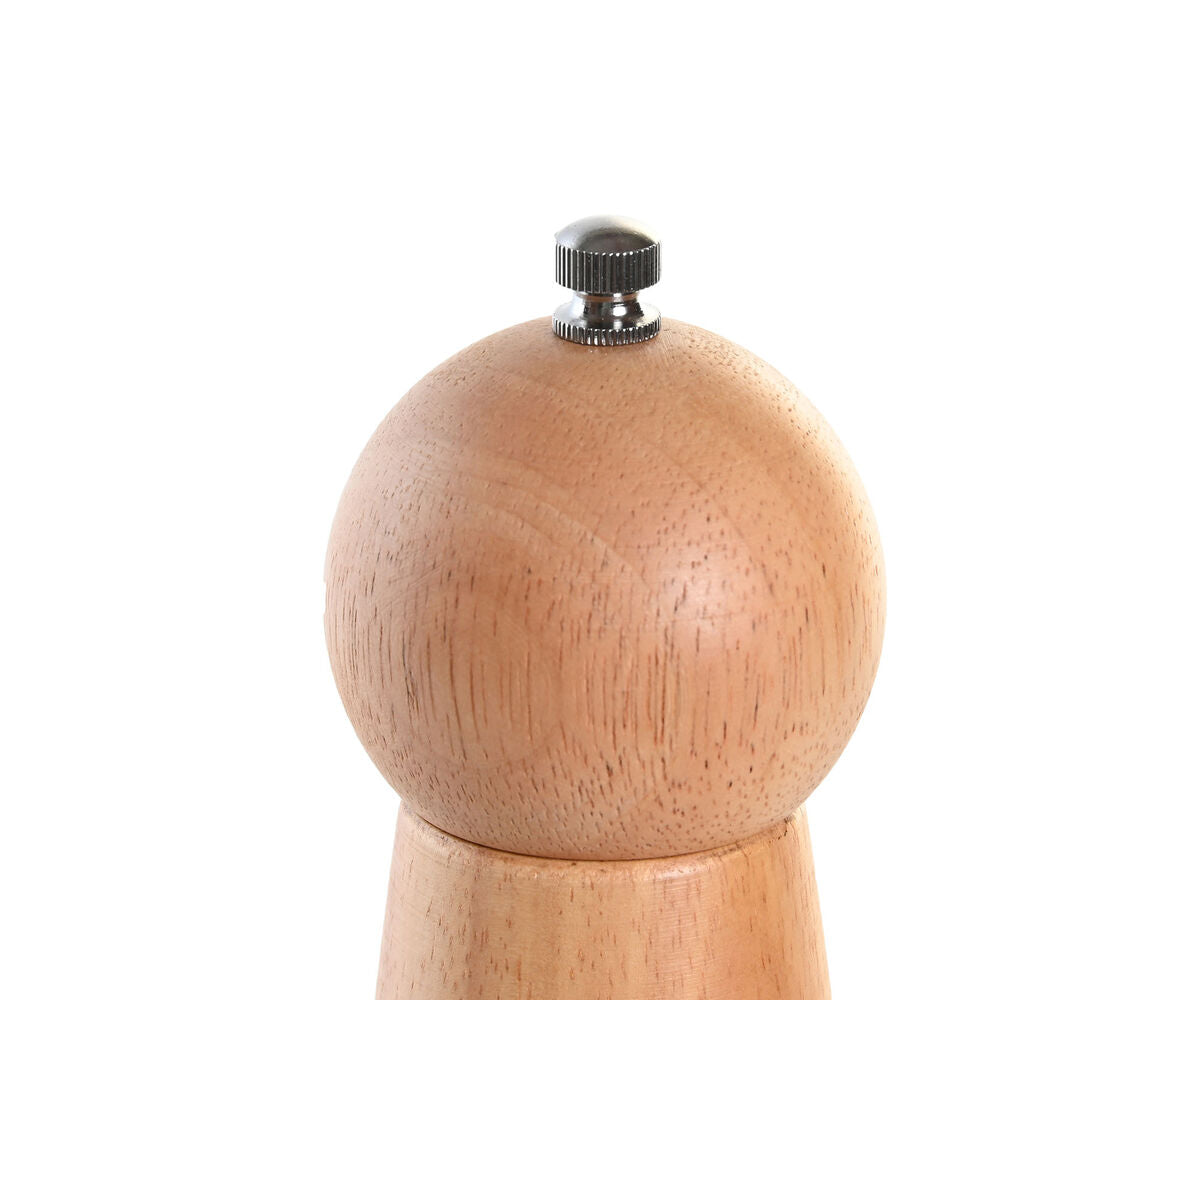 Pepper mill DKD Home Decor 6 x 6 x 21 cm Natural Stainless steel Bamboo